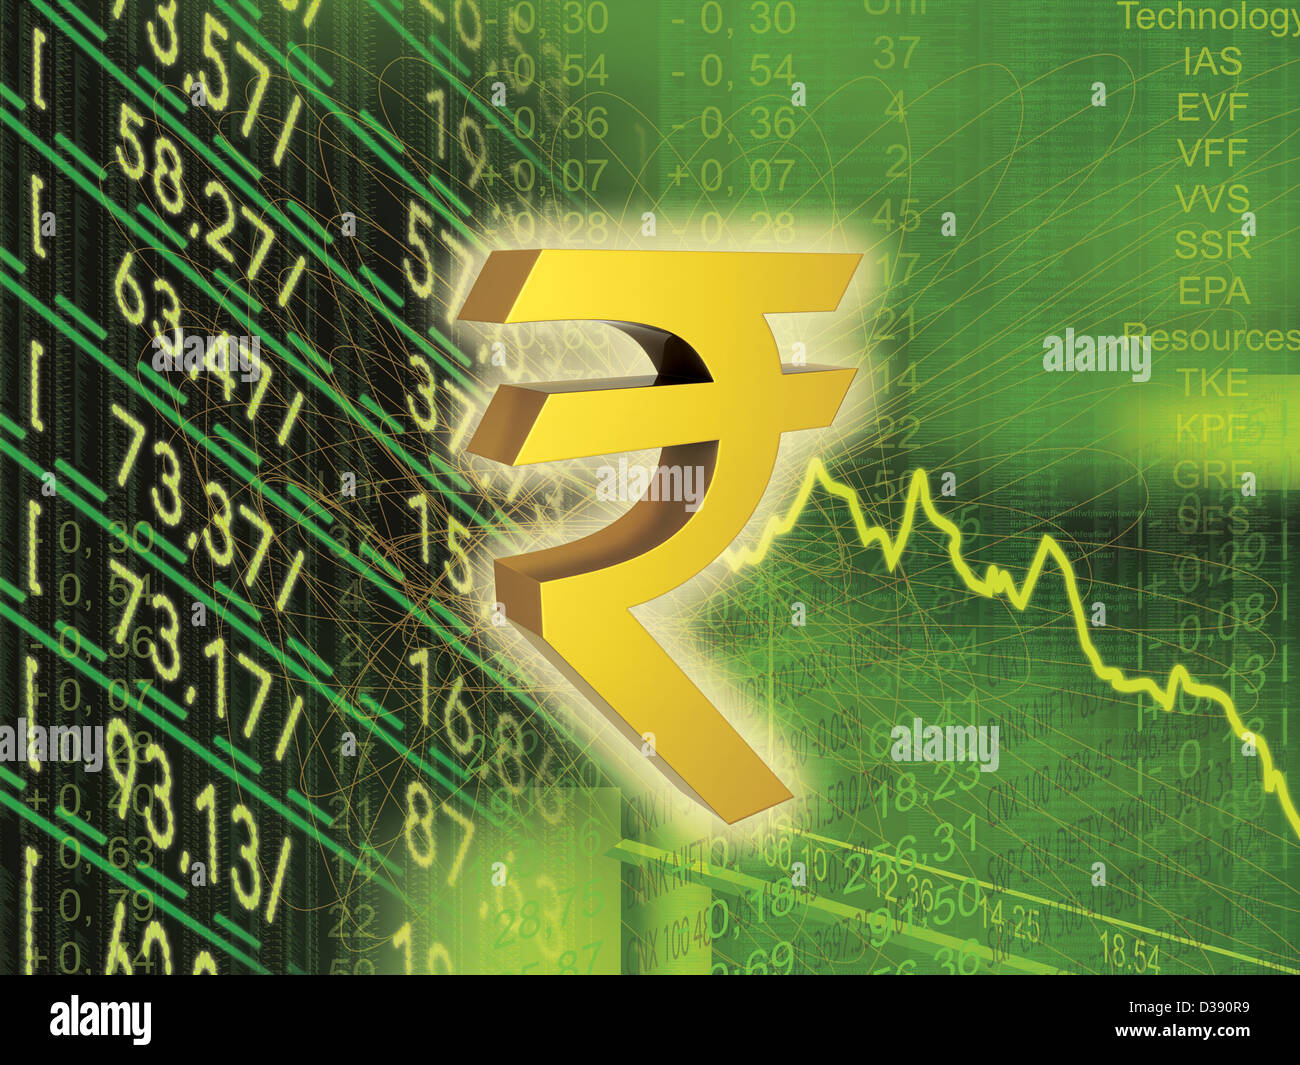 Indian rupee symbol with financial figures Stock Photo